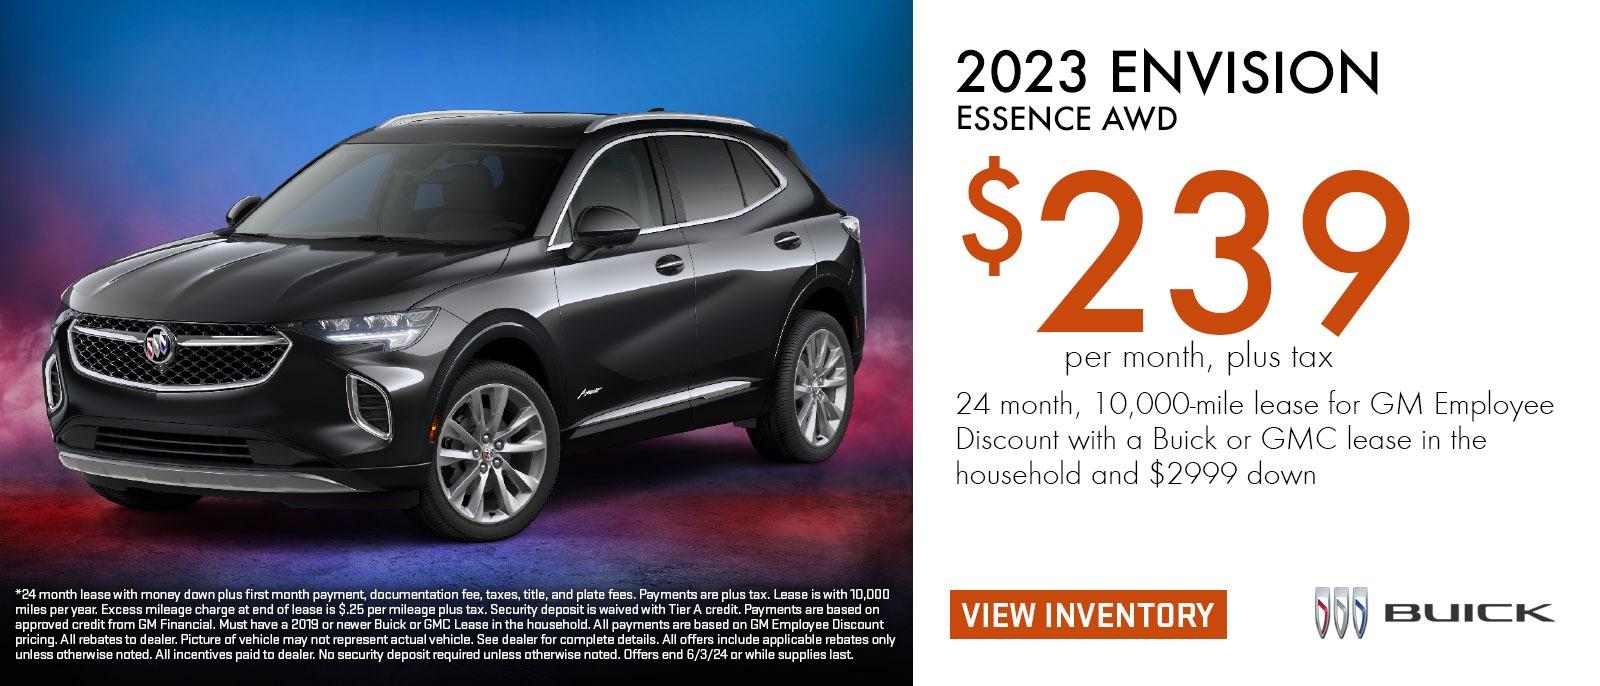 2023 Envision Essence AWD
$239 per month, plus tax*
24 months, 10,000-mile lease for GM Employee Discount with a Buick or GMC lease in the household and $2999 down